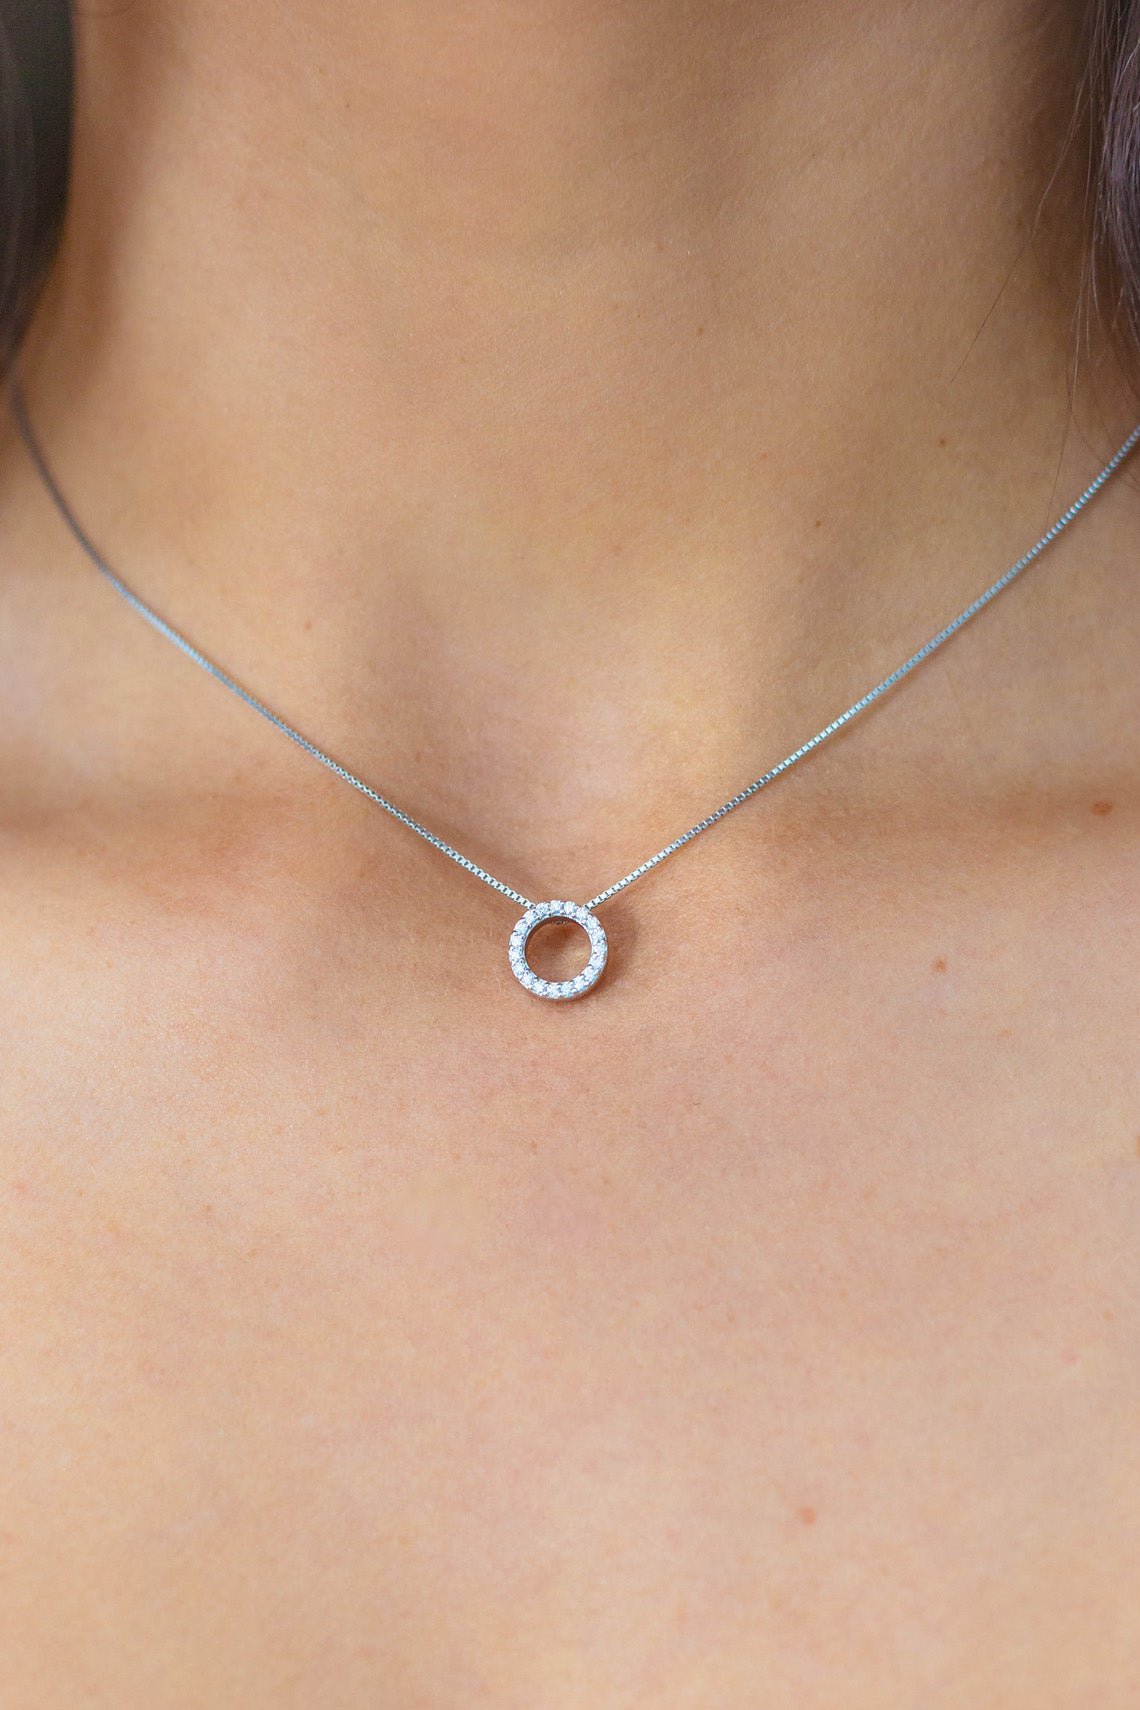 CIRCLE 0.15TCW IN 9CT WHITE GOLD PENDANT